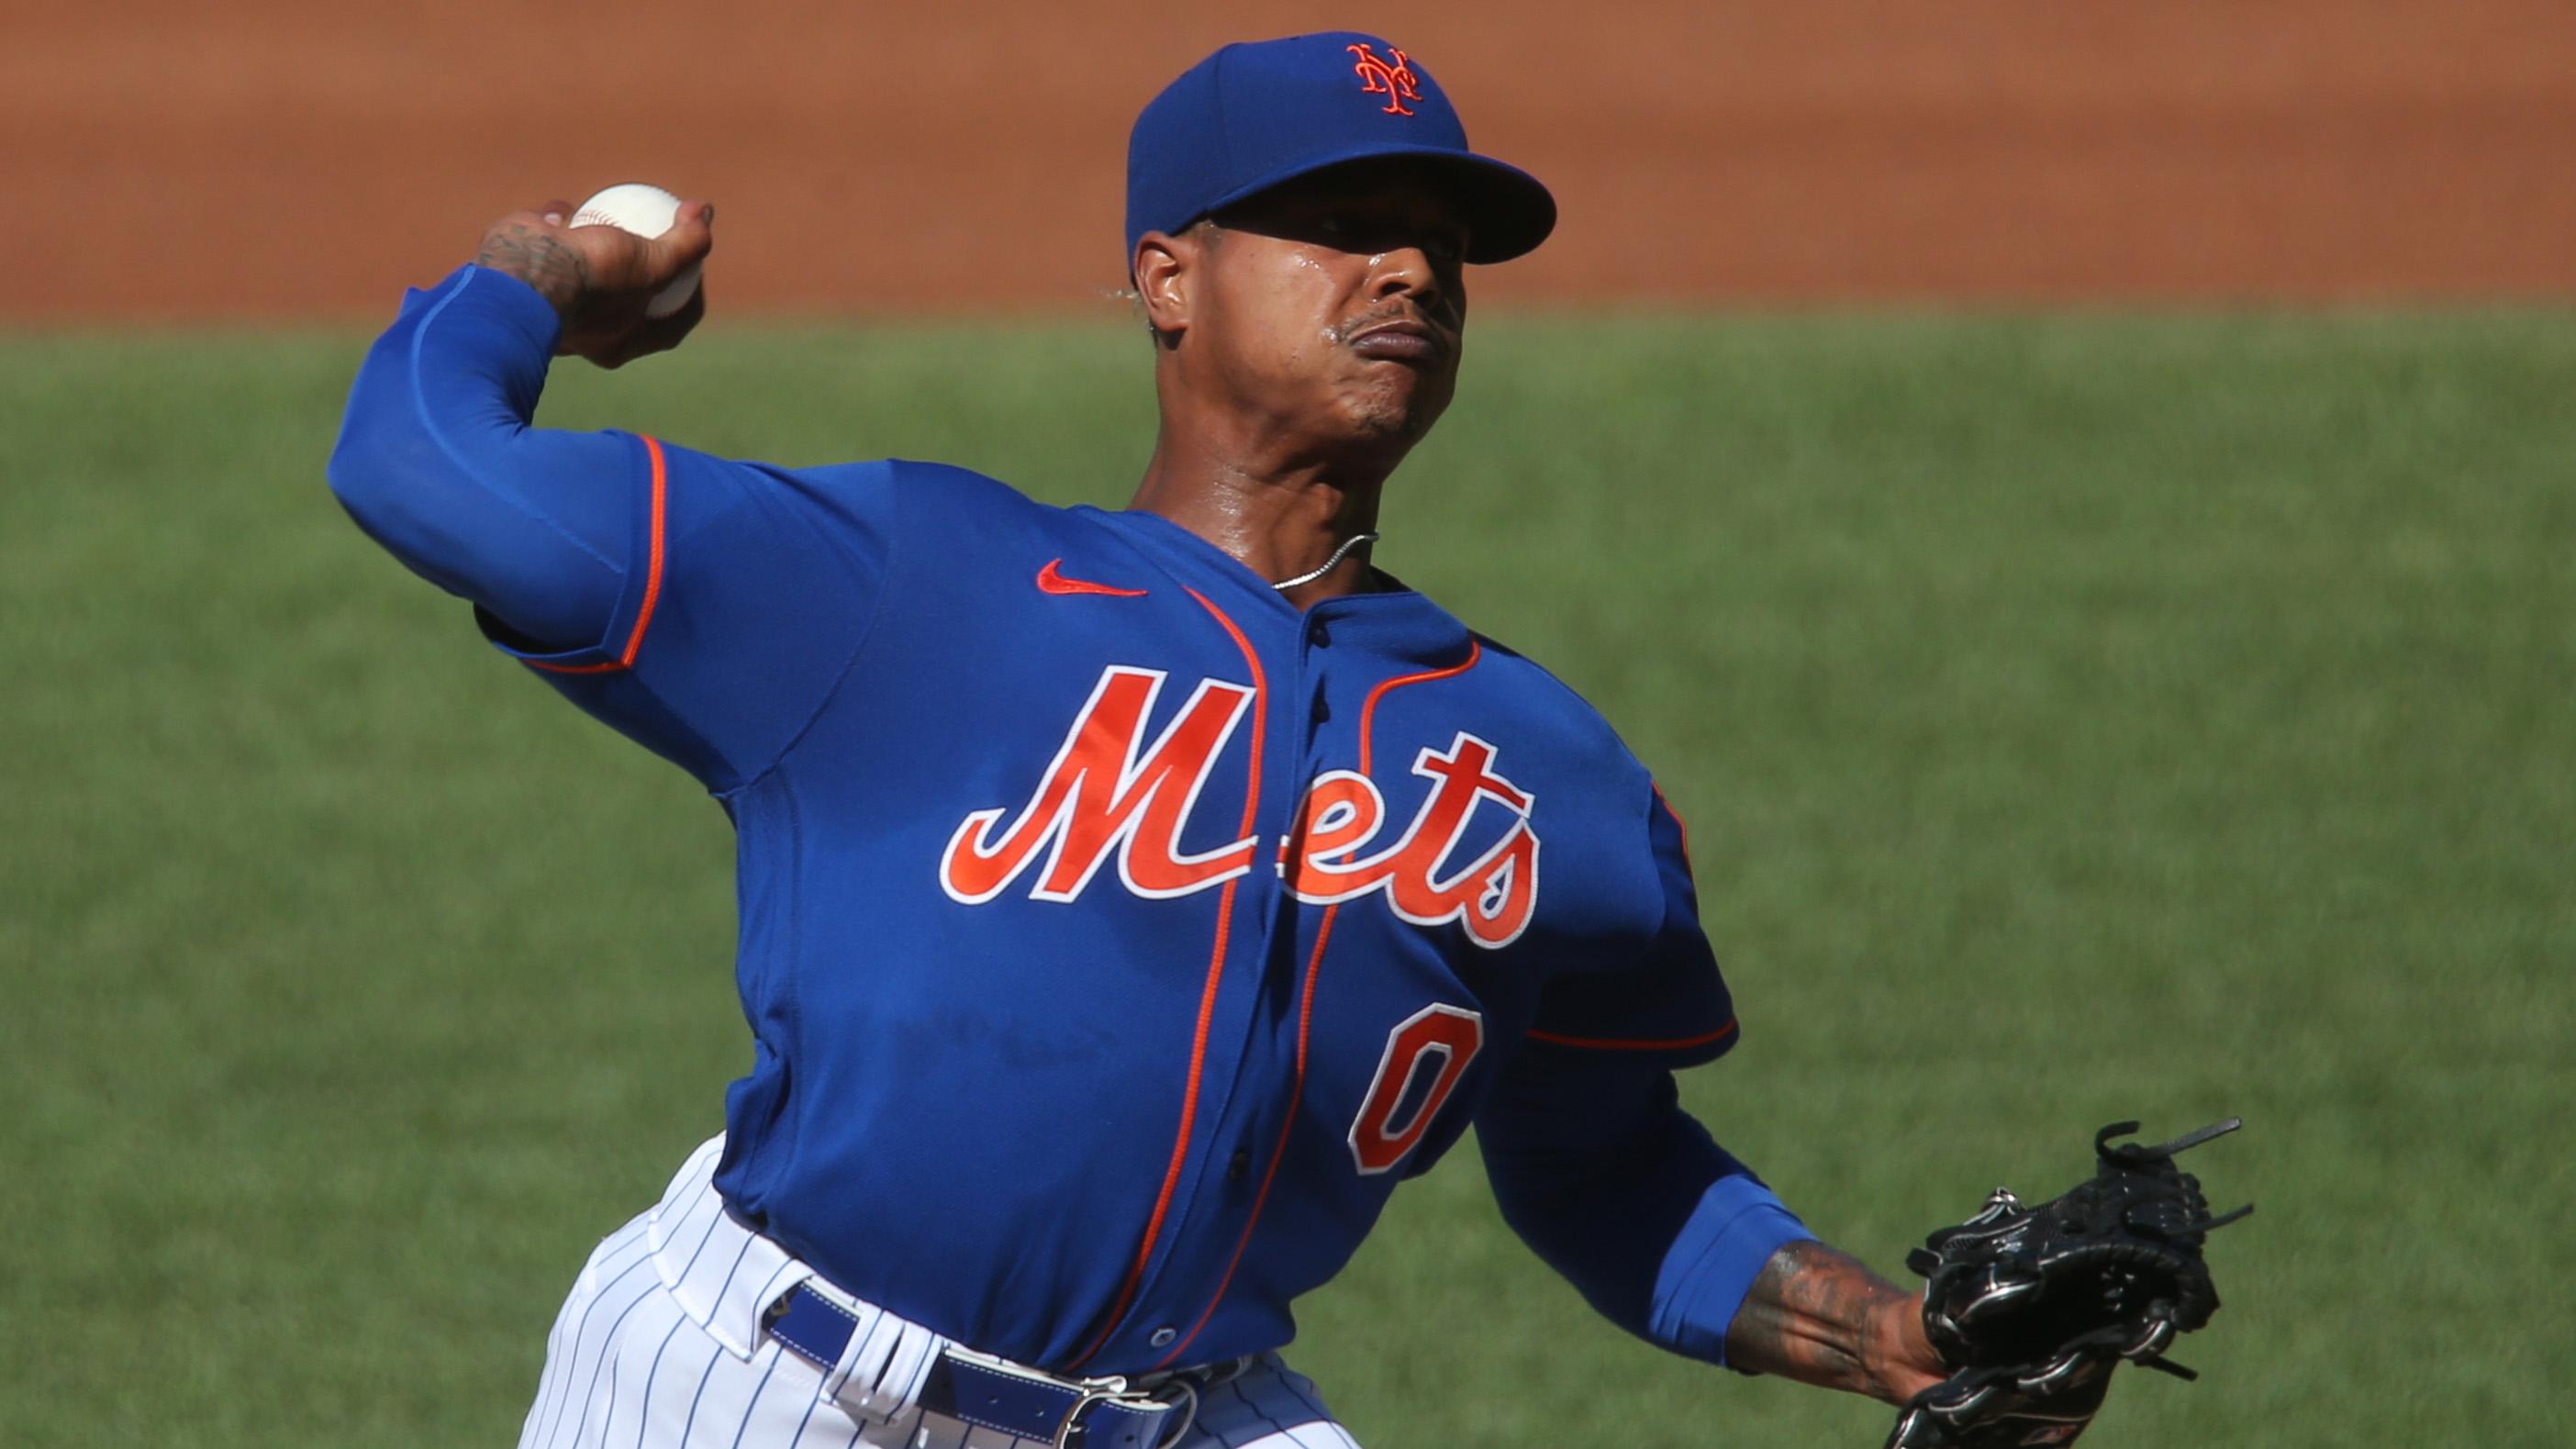 New York Mets starting pitcher Marcus Stroman (0) pitches during a simulated game during summer camp workouts at Citi Field. / Mandatory Credit: Brad Penner-USA TODAY Sports